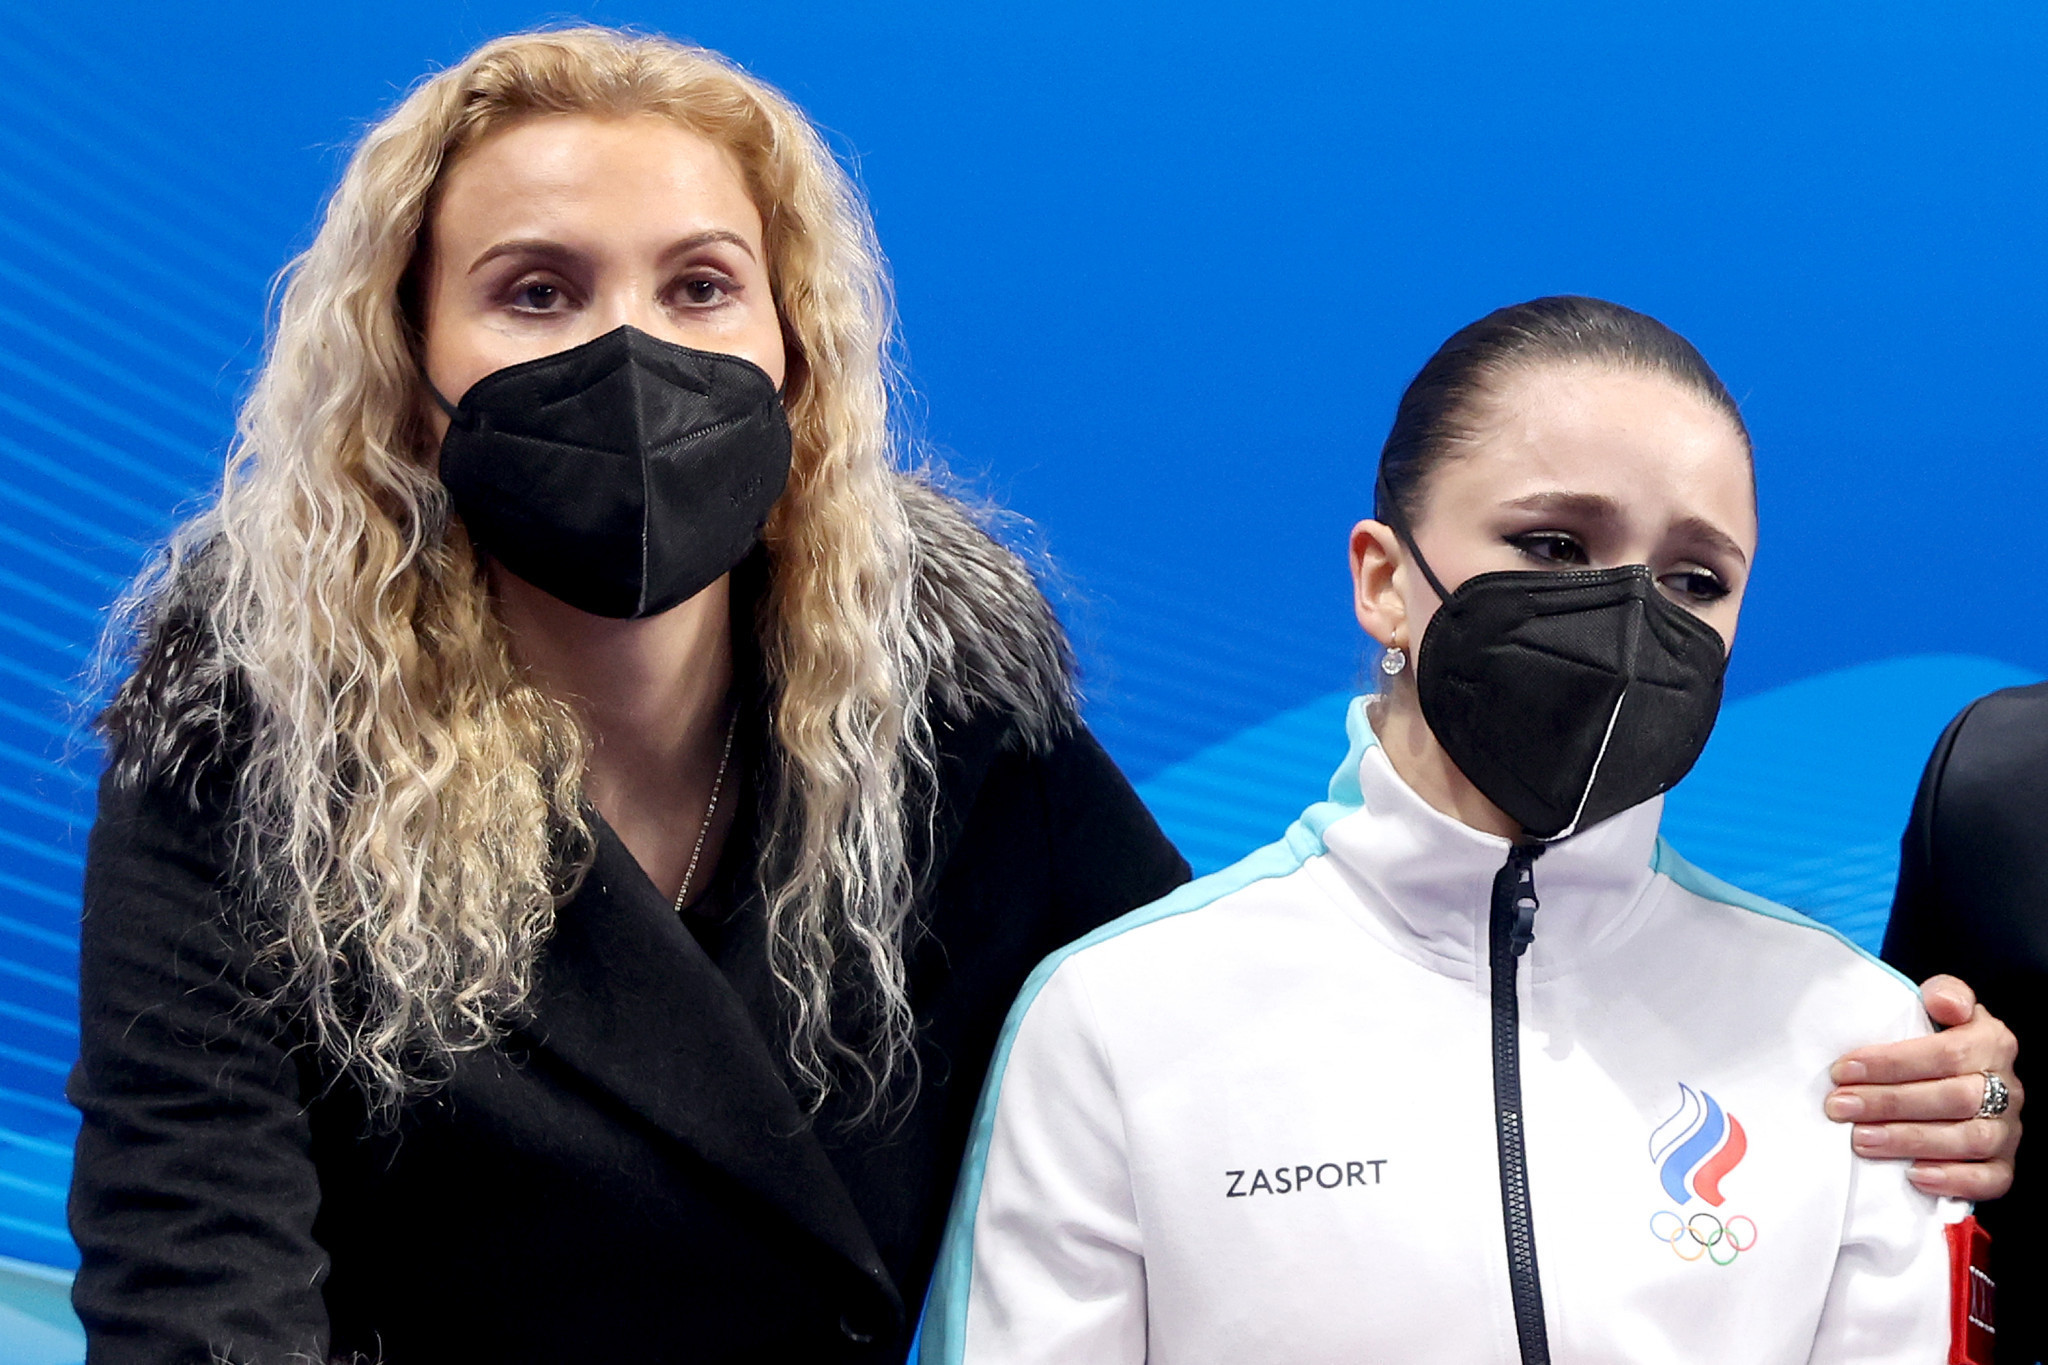 Russian skating coach Eteri Tutberidze, left, was strongly criticised by Thomas Bach for the way she treated 15-year-old Kamila Valieva at Beijing 2022 ©Getty Images